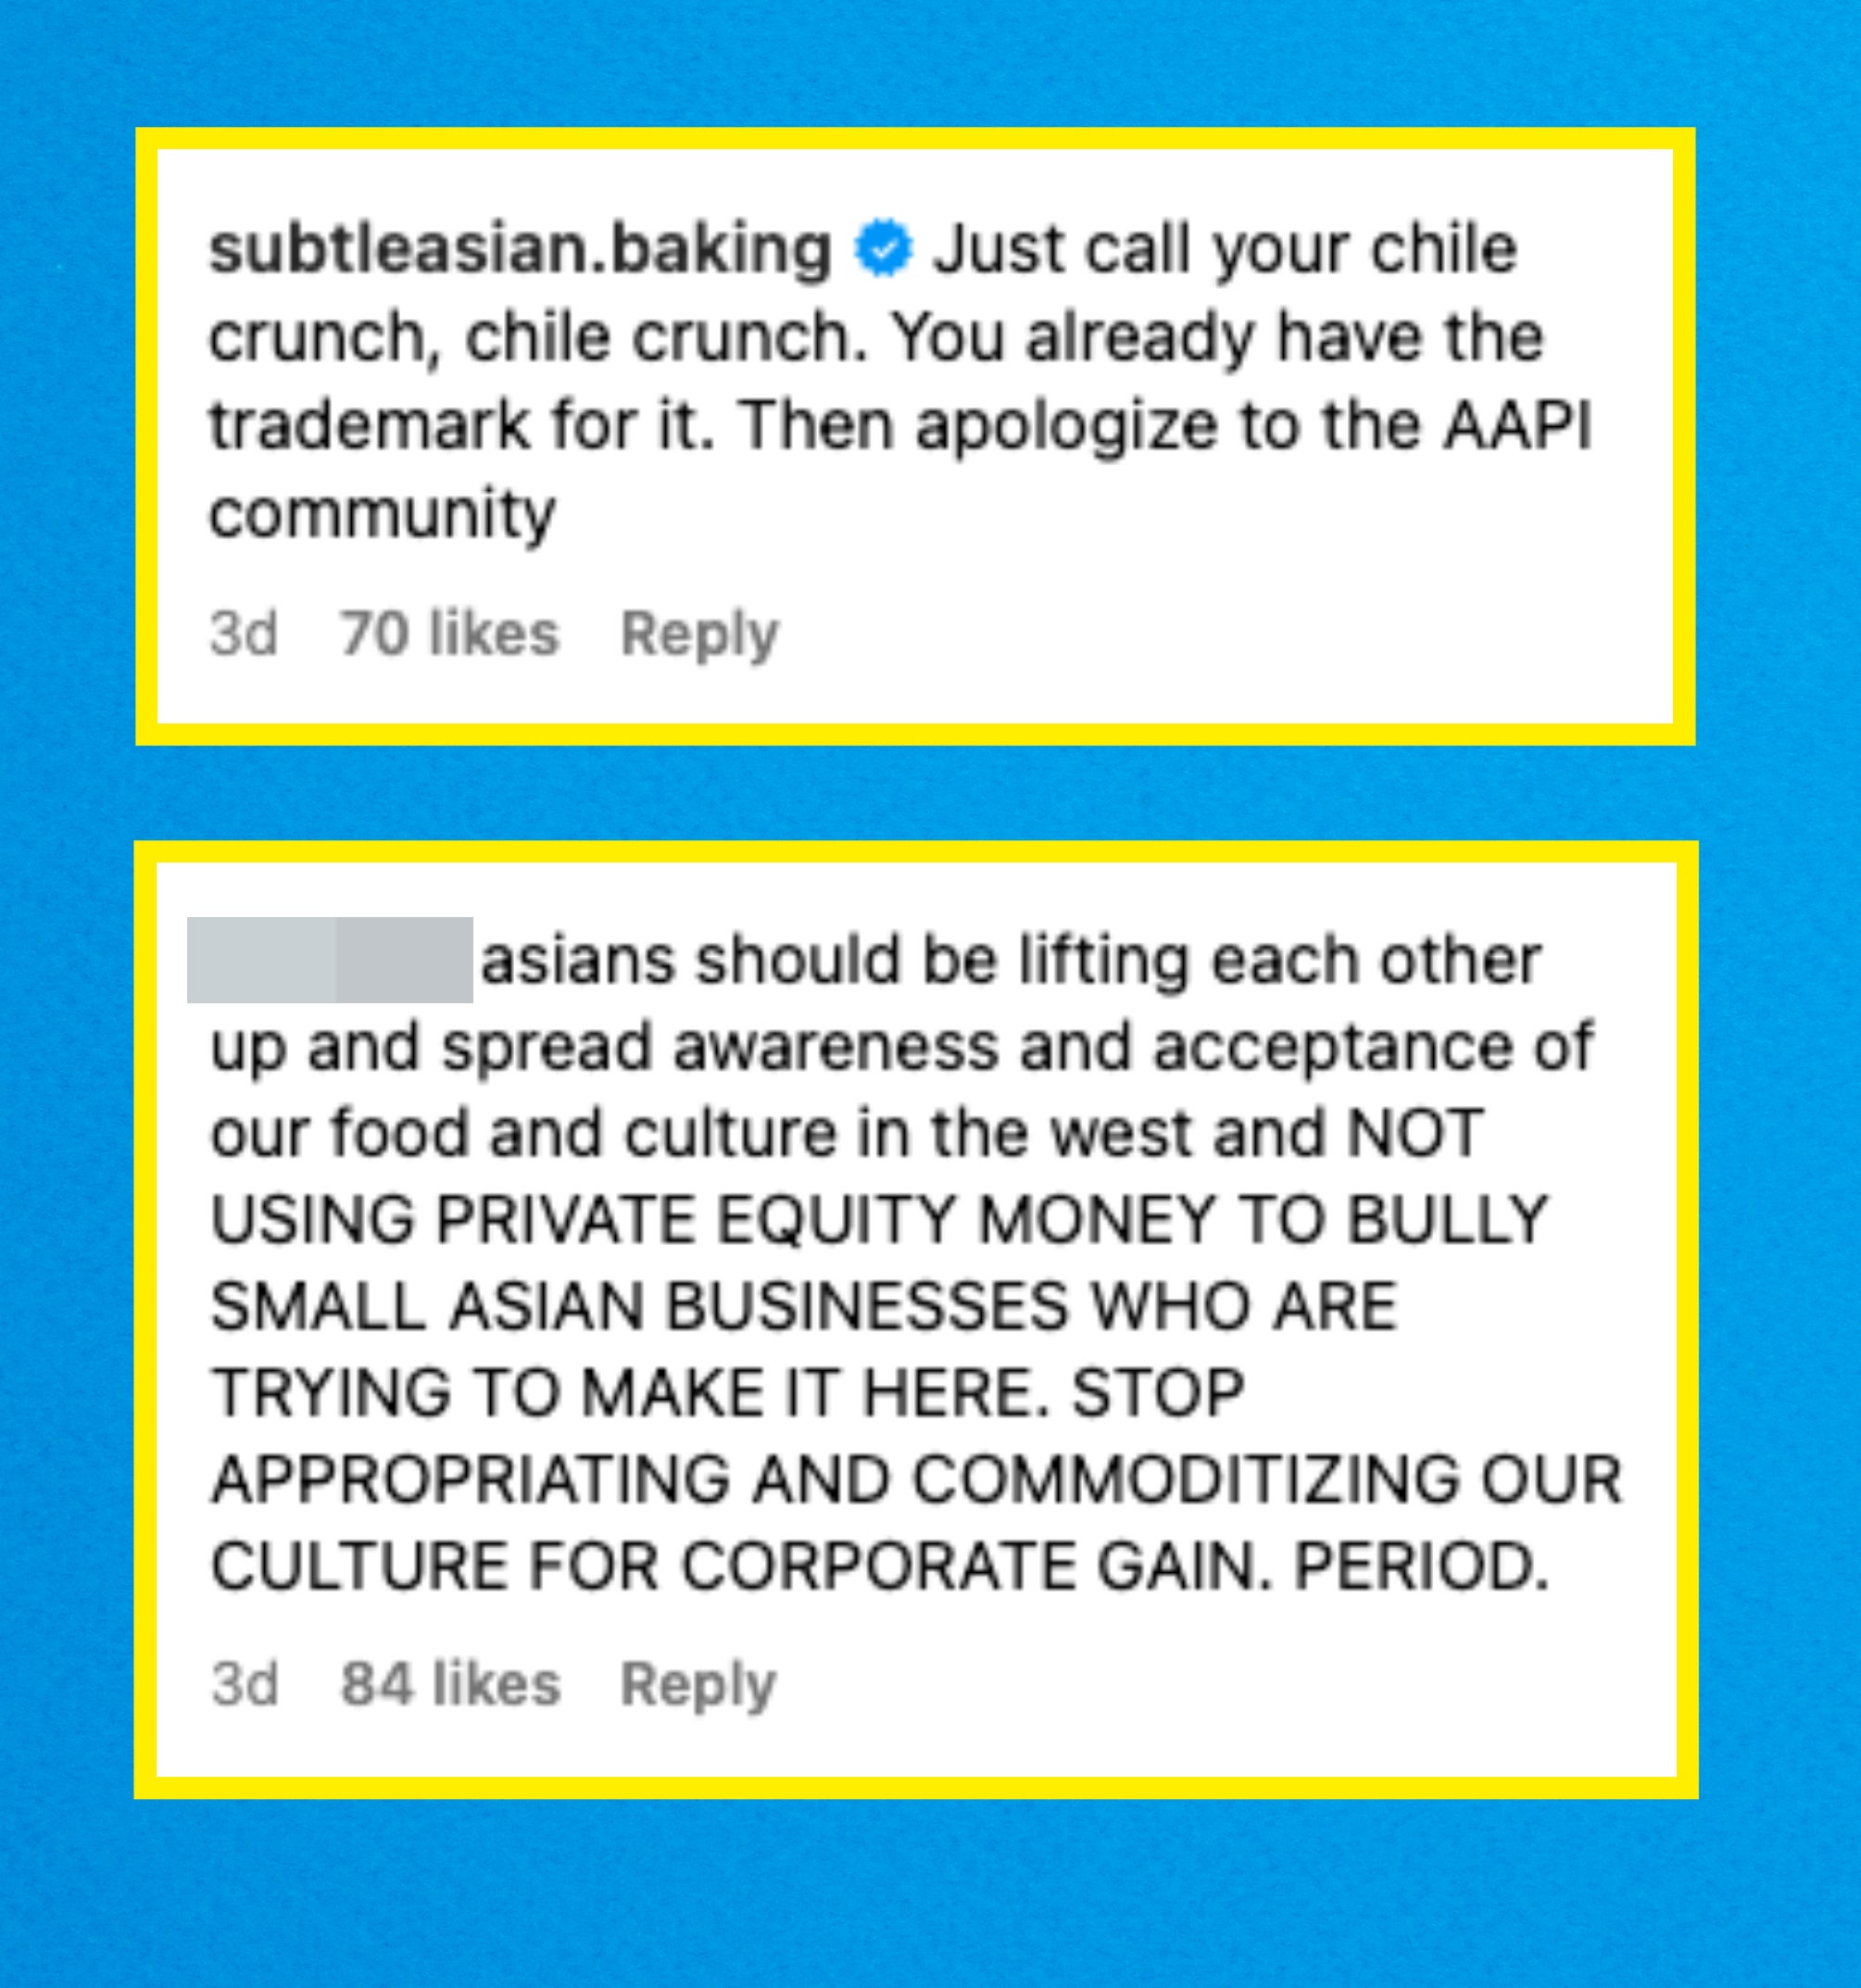 Instagram comments depicting users asking David Chang to apologize to the AAPI community and for businesses to lift each other up.